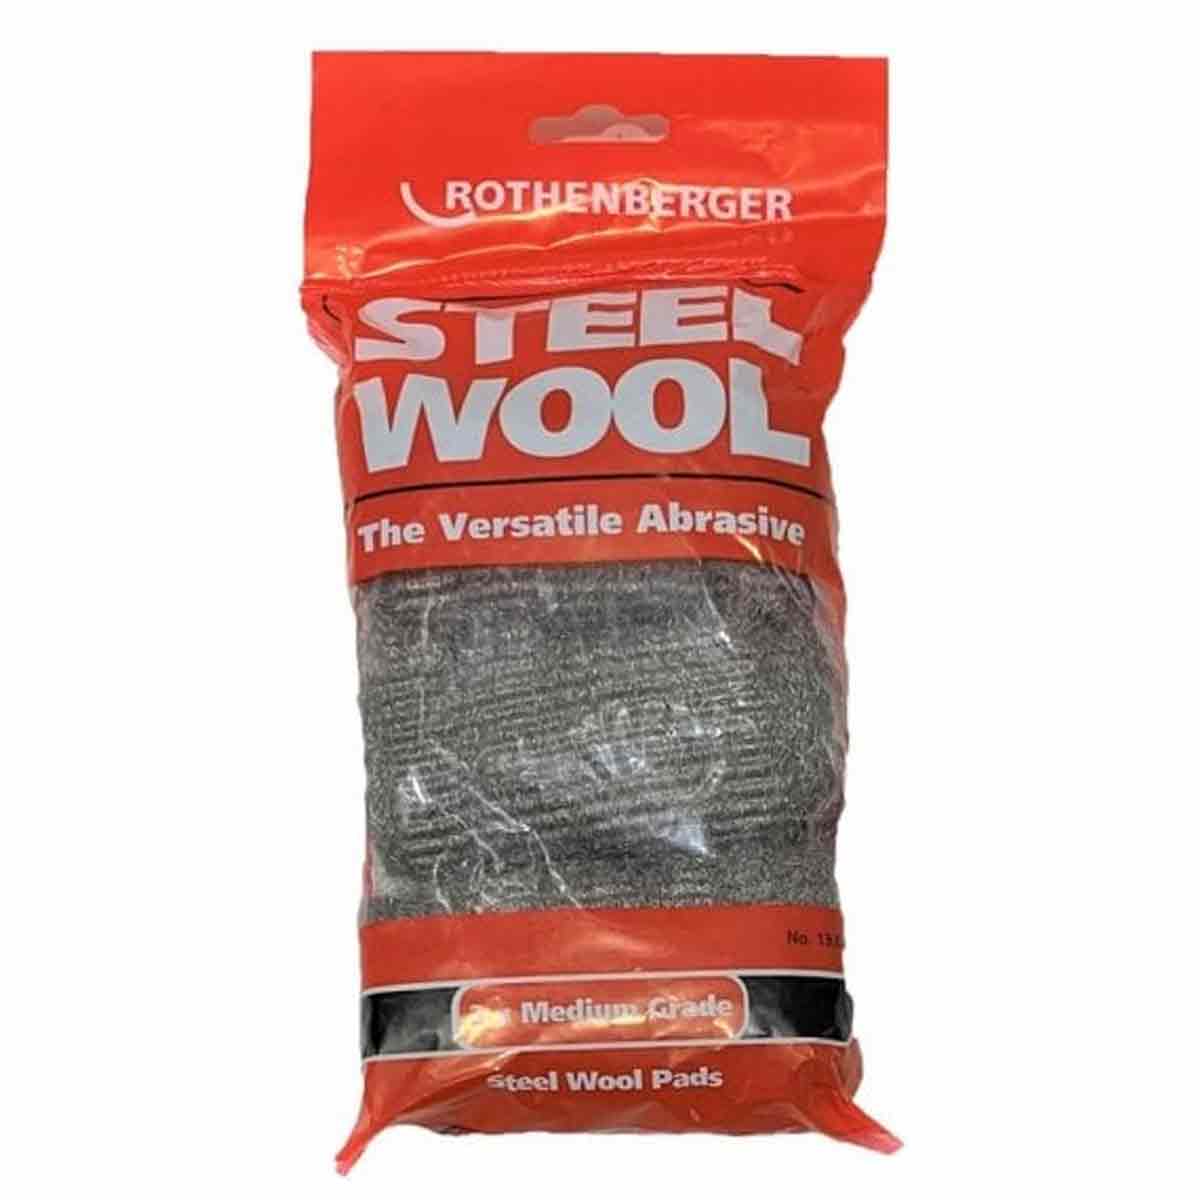 Rothenberger Steel Wool Pads Medium Grade Pack of 3 for Cleaning